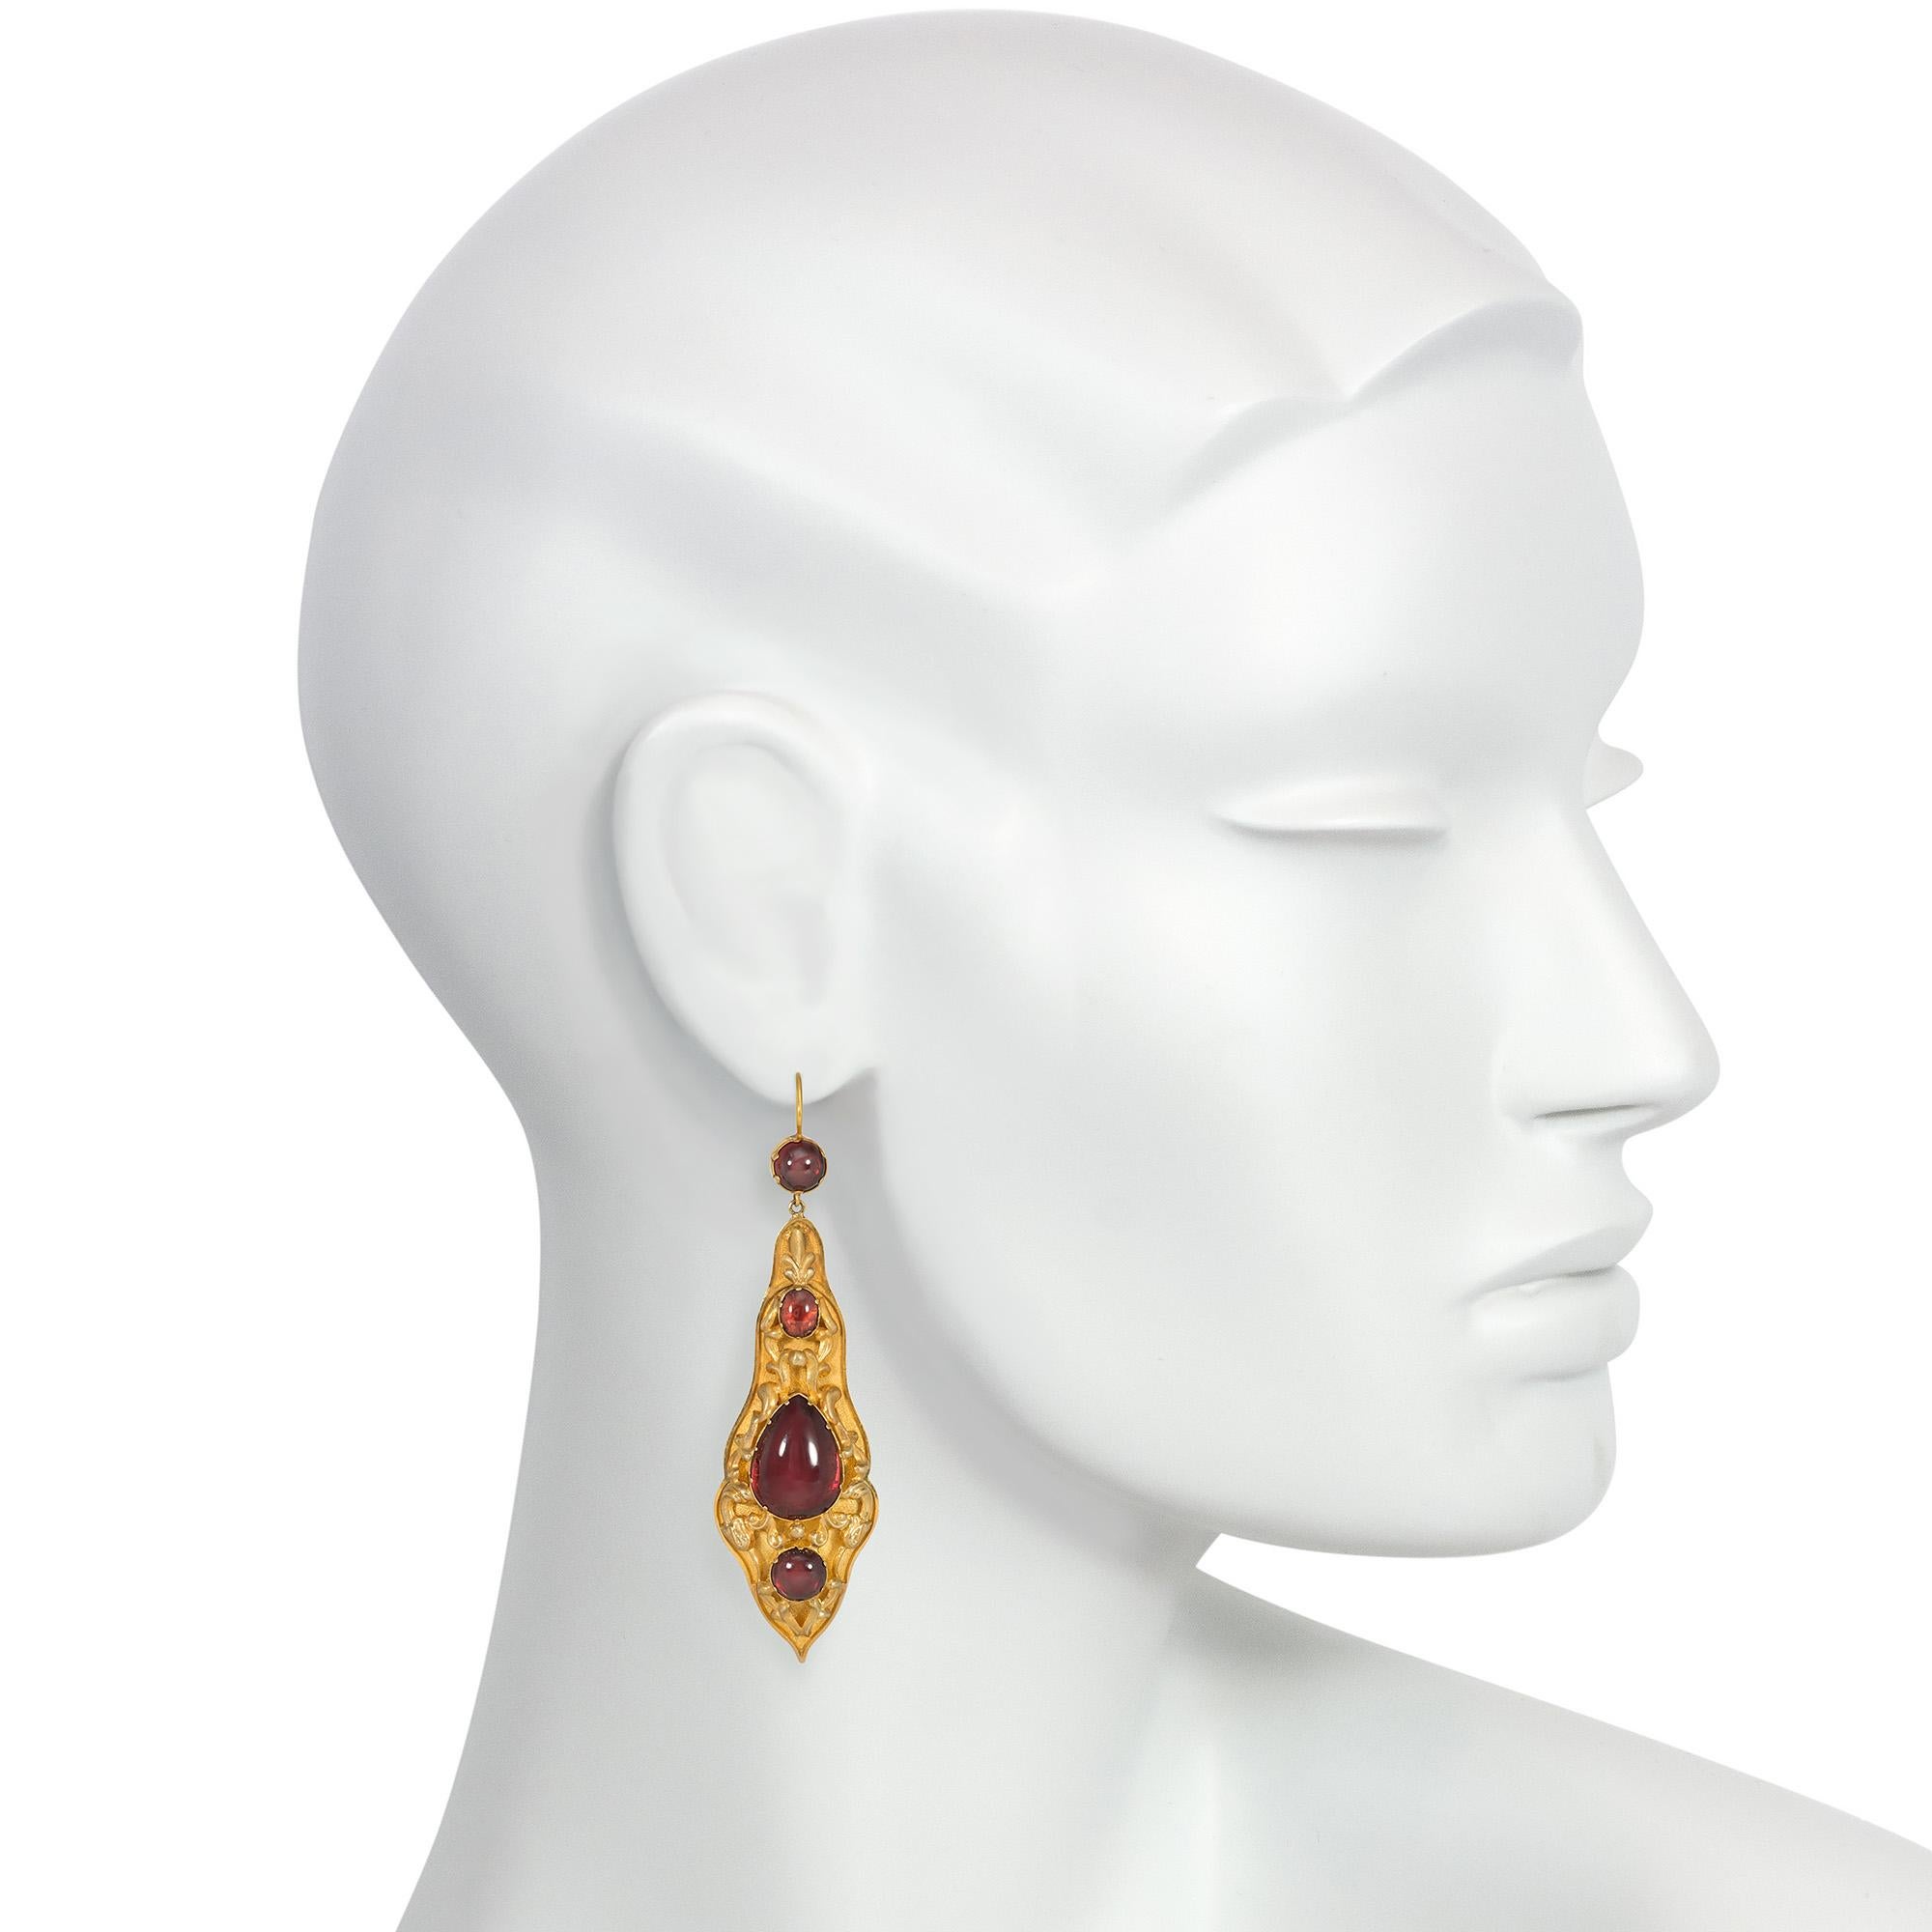 Antique Gold and Cabochon Garnet Pendant Earrings with Repoussé Decoration In Good Condition For Sale In New York, NY